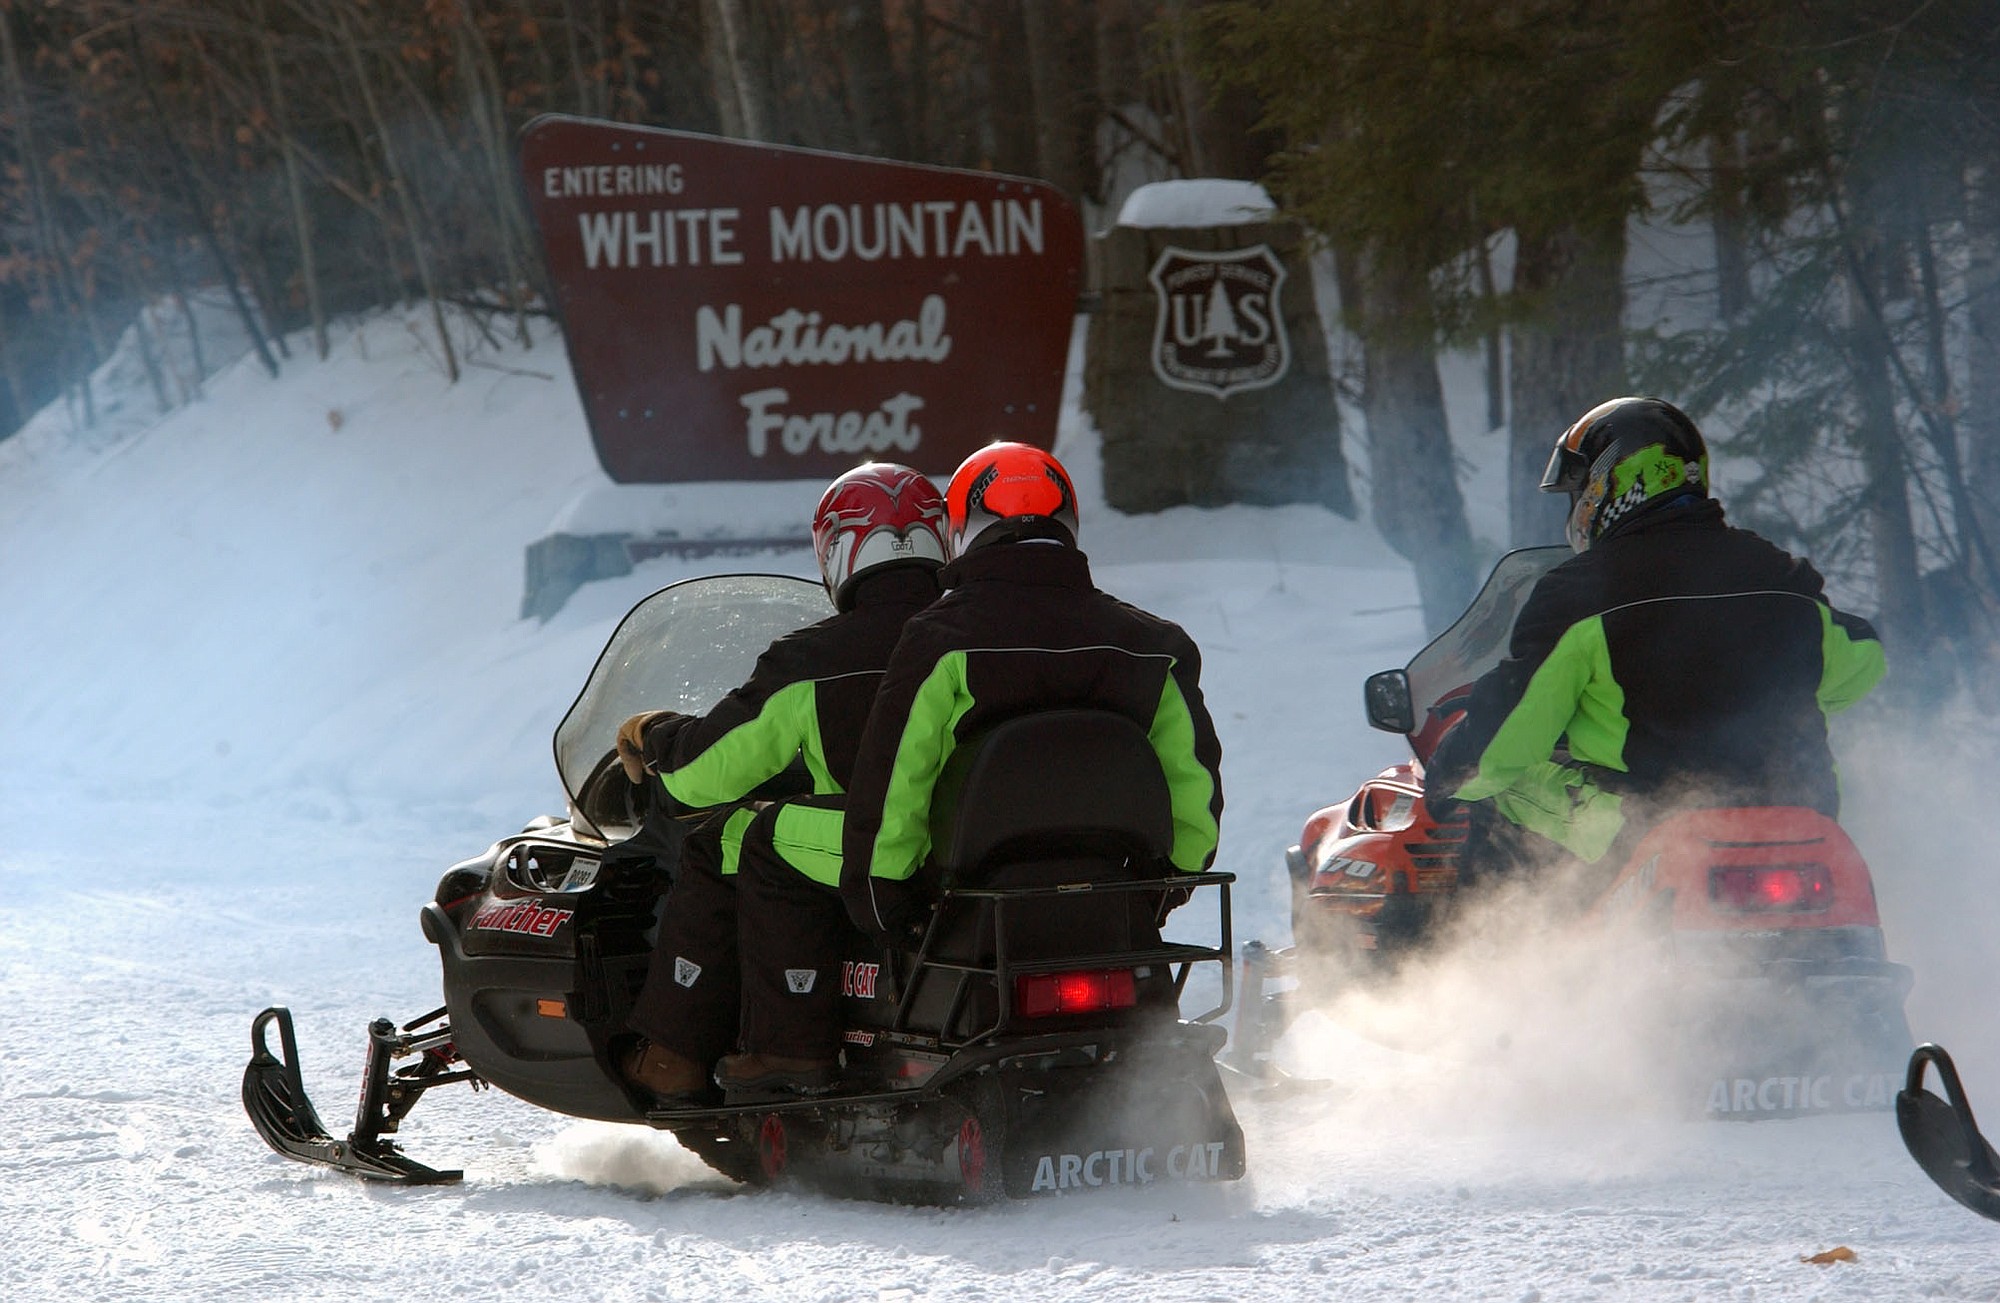 The Conway Daily Sun files
Snowmobilers start their travels in the White Mountain National Forest in Bartlett, N.H. Snowmobilers in all national forests in the U.S. may soon find limits on where they can ride after a U.S. Forest Service rule takes effect Feb. 27.